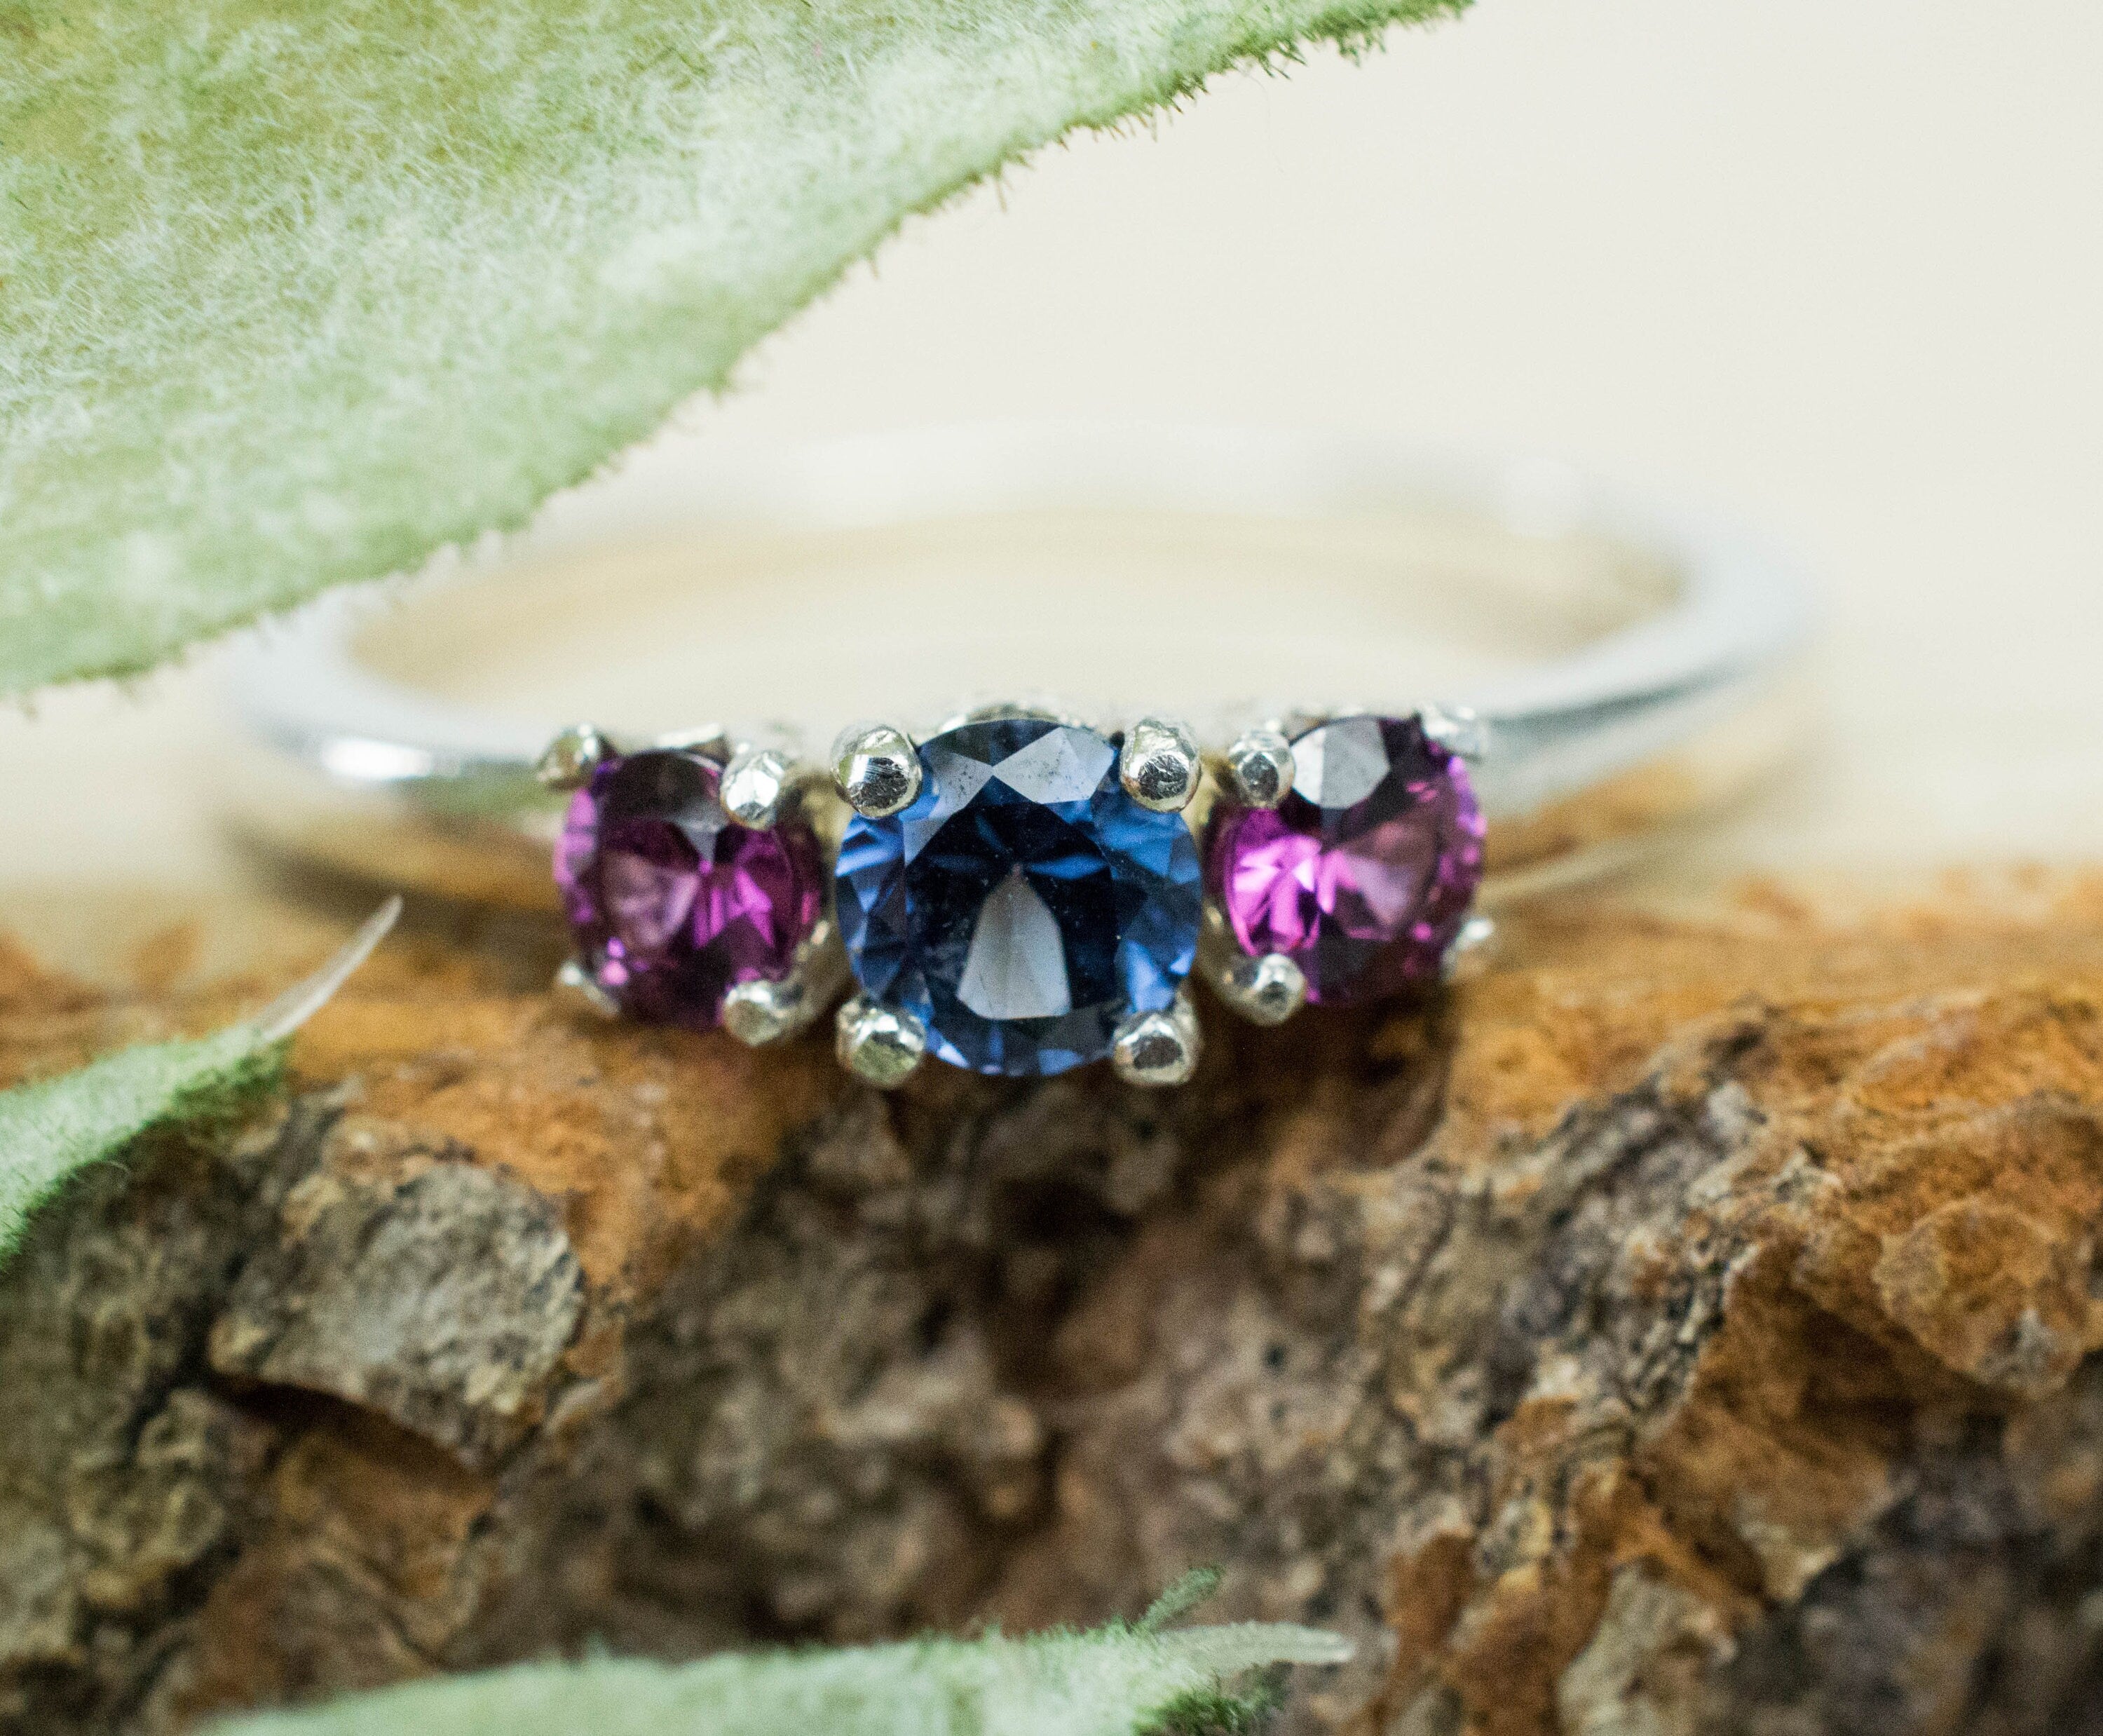 Blue Spinel and Purple Garnet Ring, Genuine Untreated Mozambique Spinel and Garnet